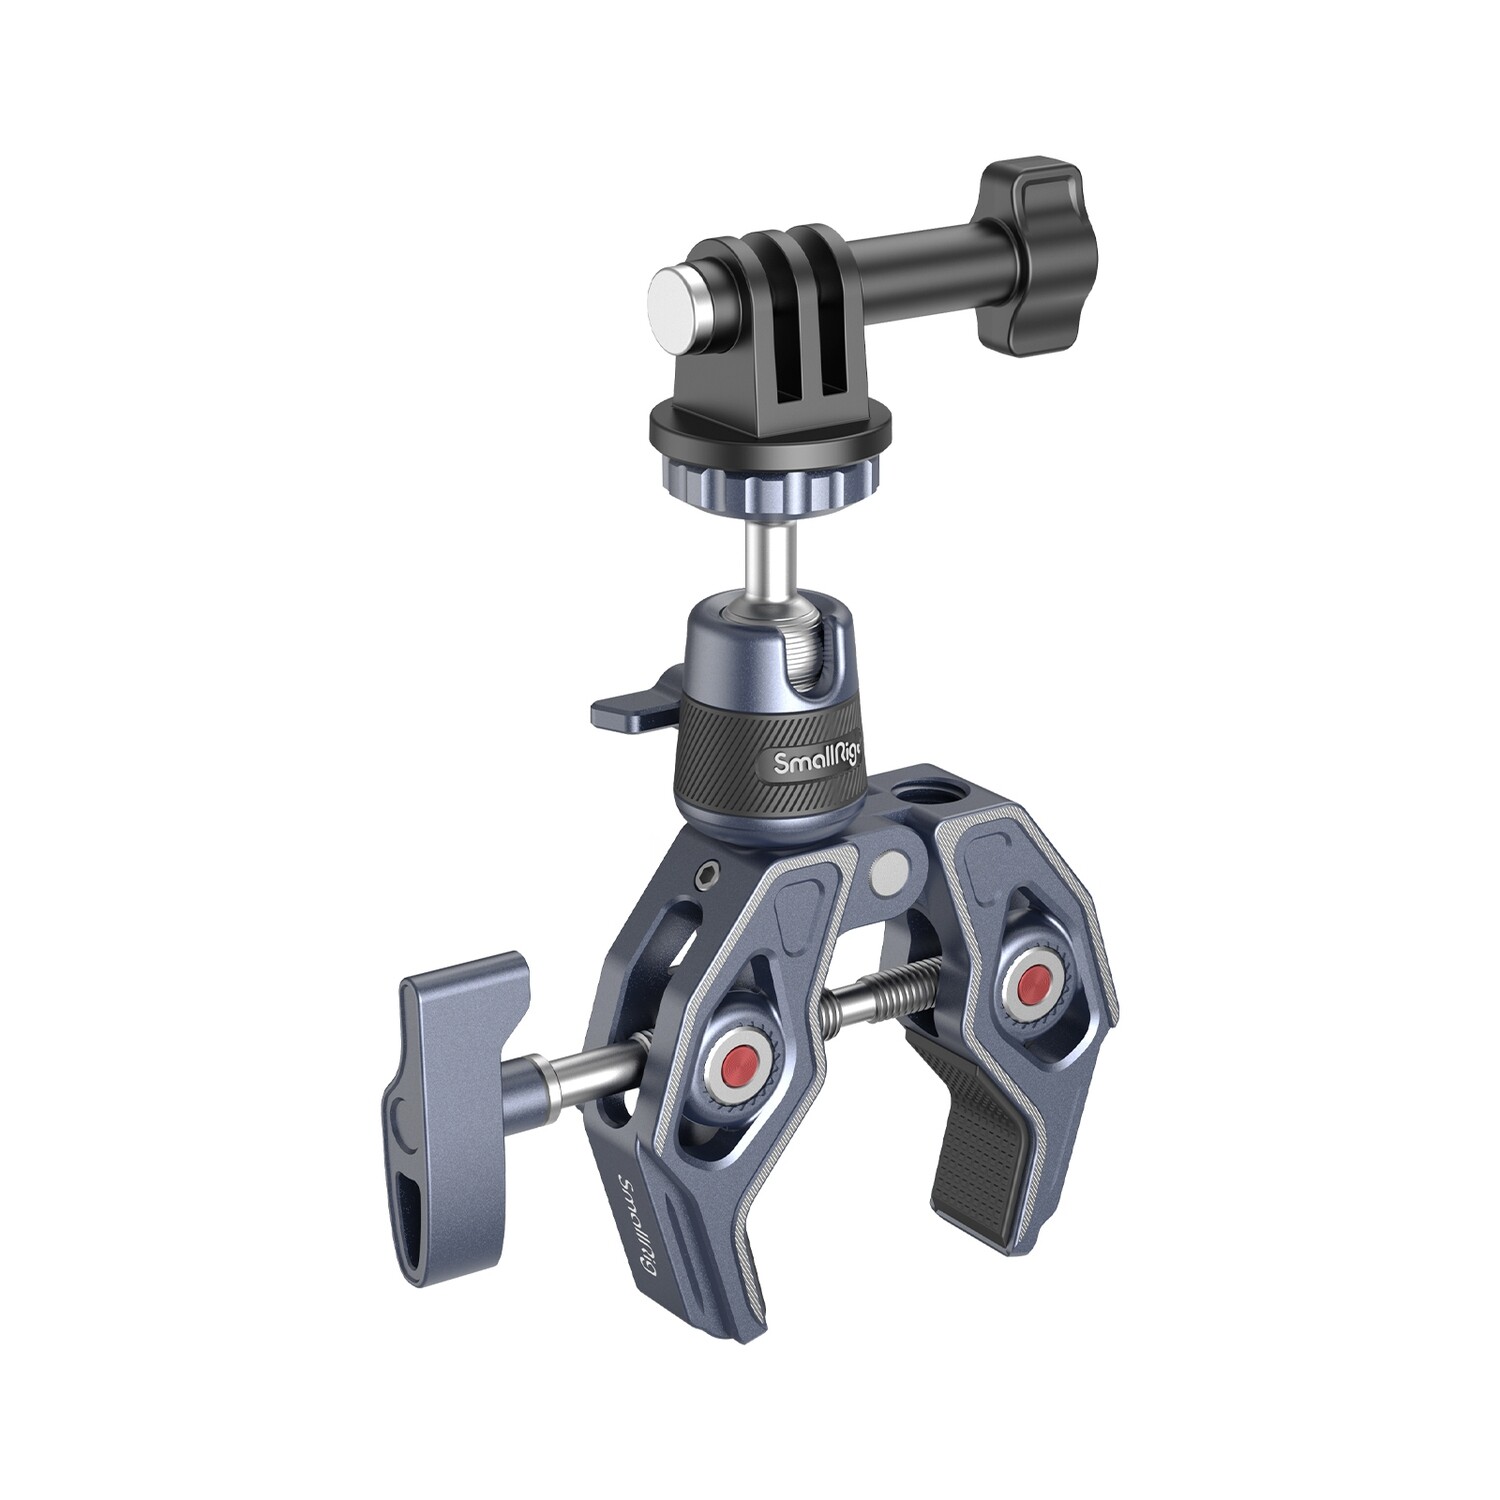 SmallRig Super Clamp with 360° Ball Head Mount for Action Cameras